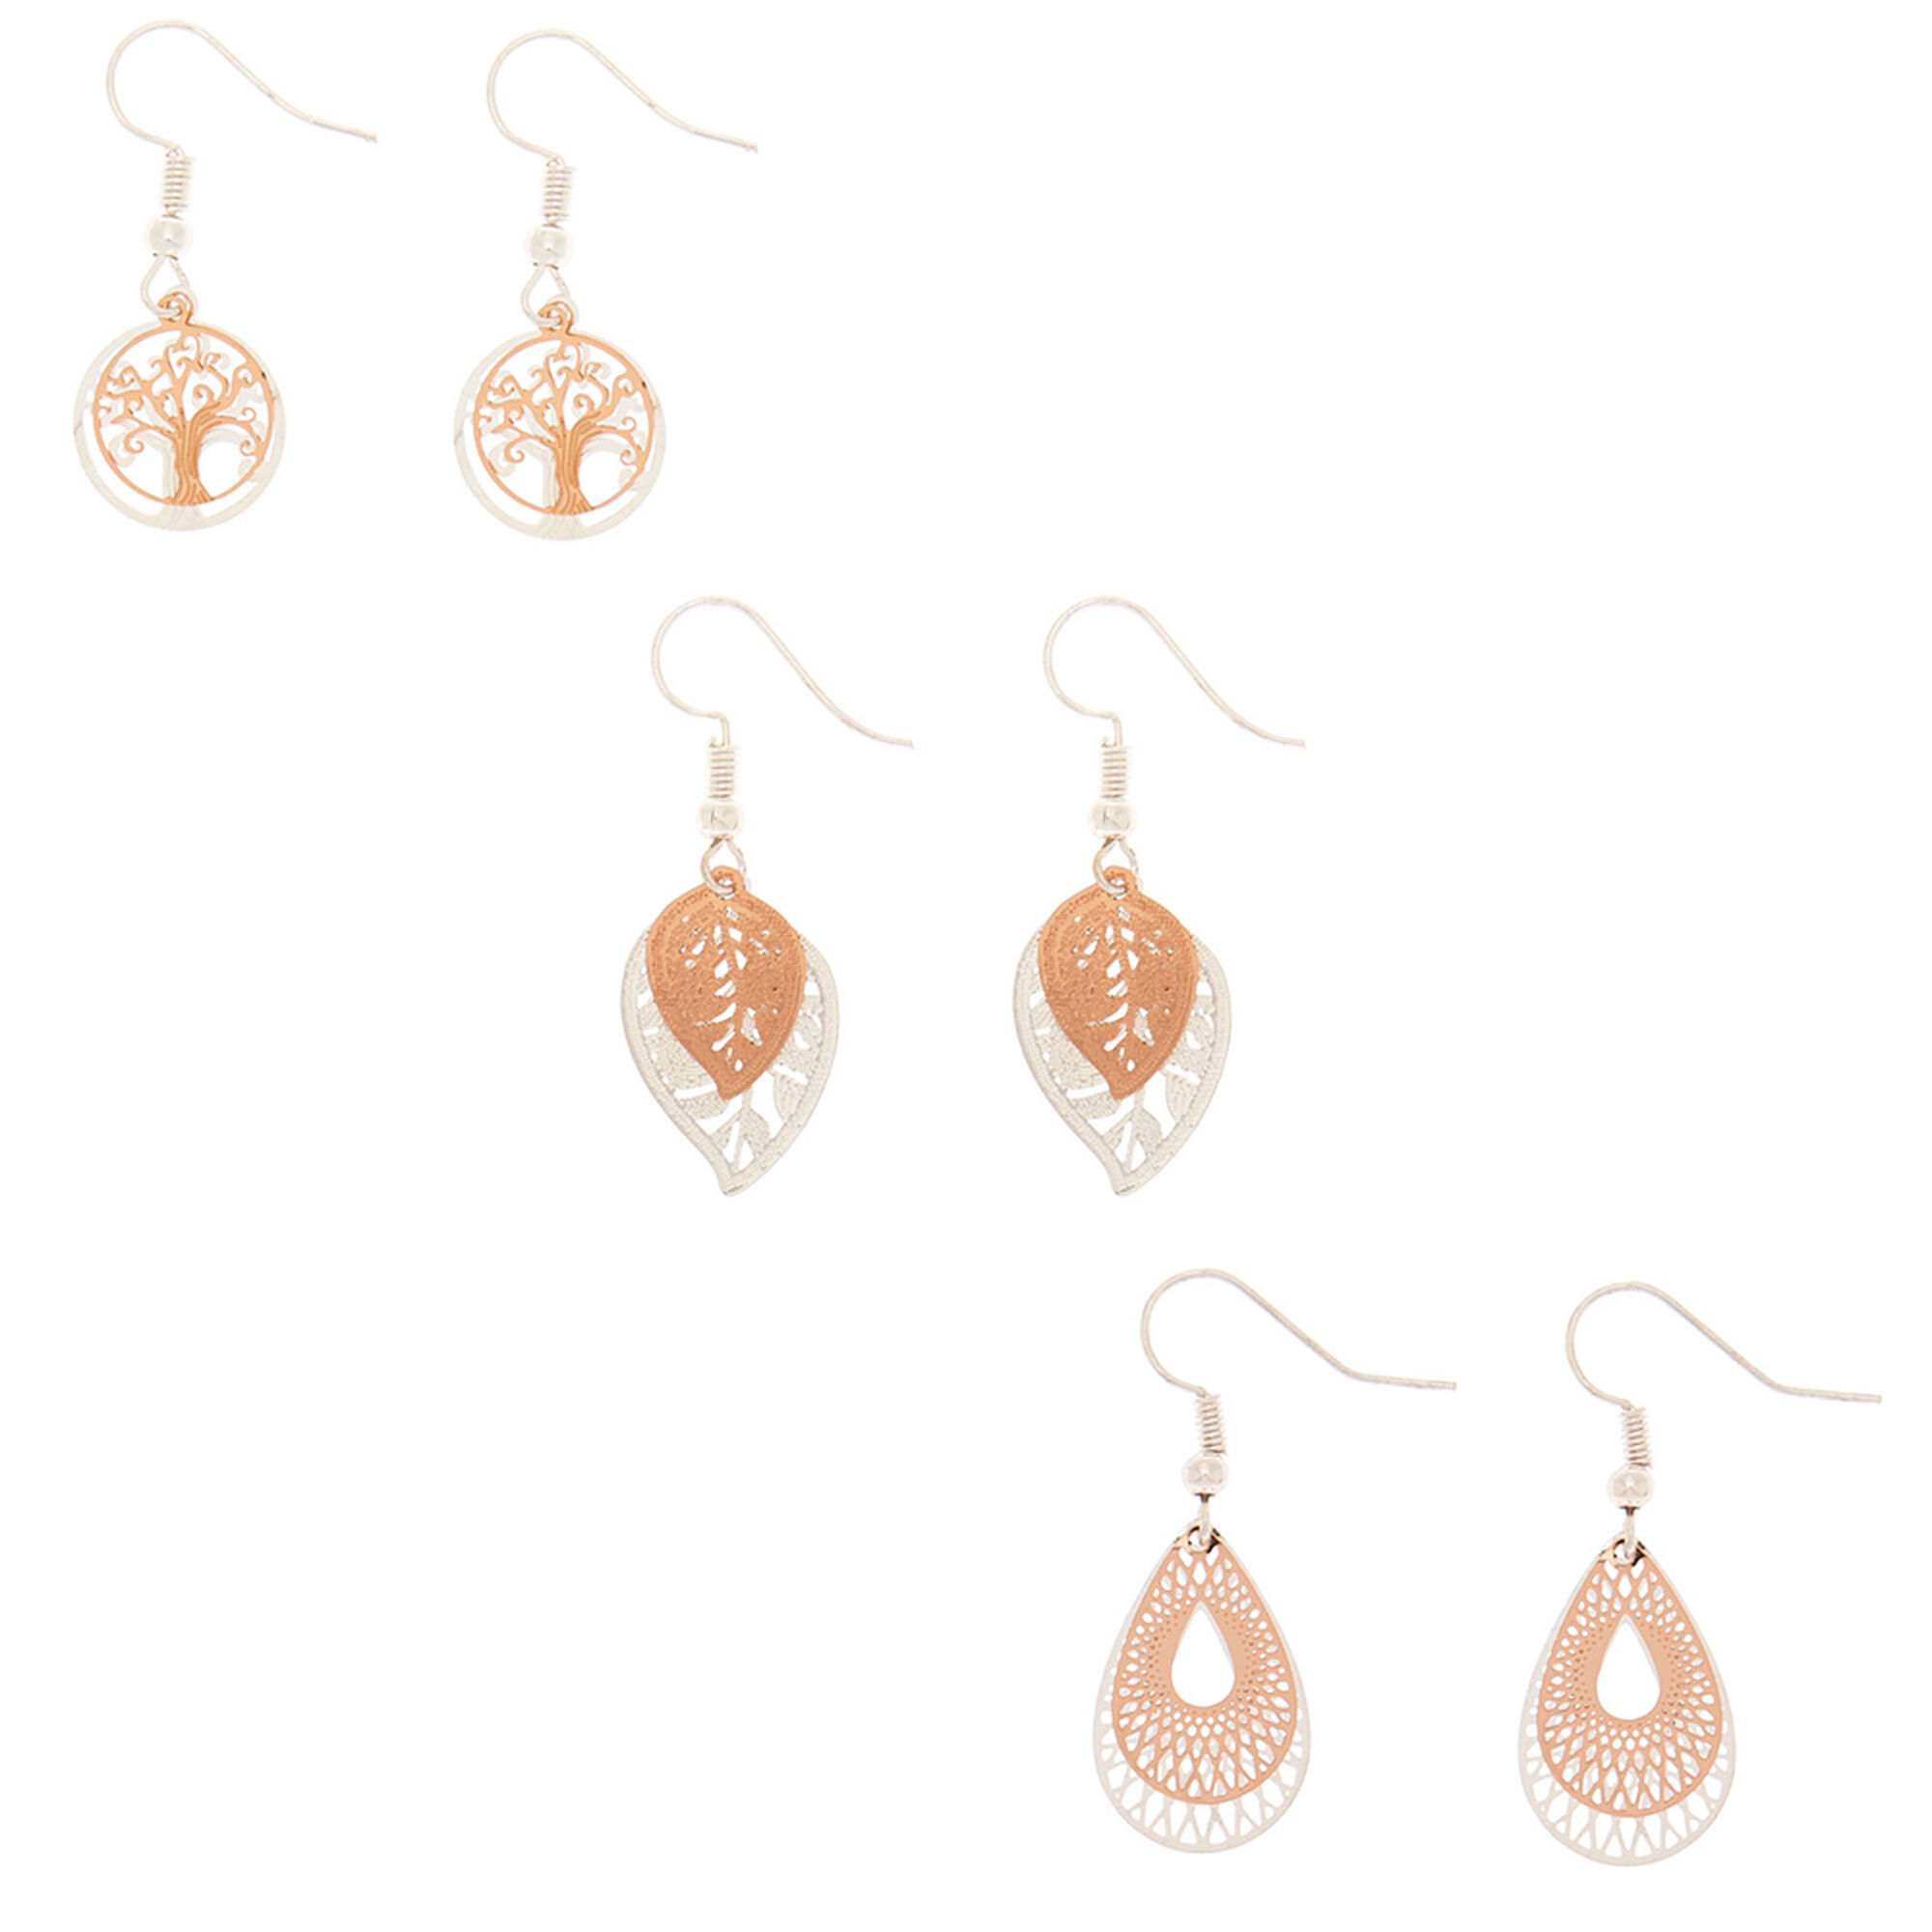 View Claires Mixed Metal Filigree Drop Earrings 3 Pack Rose Gold information